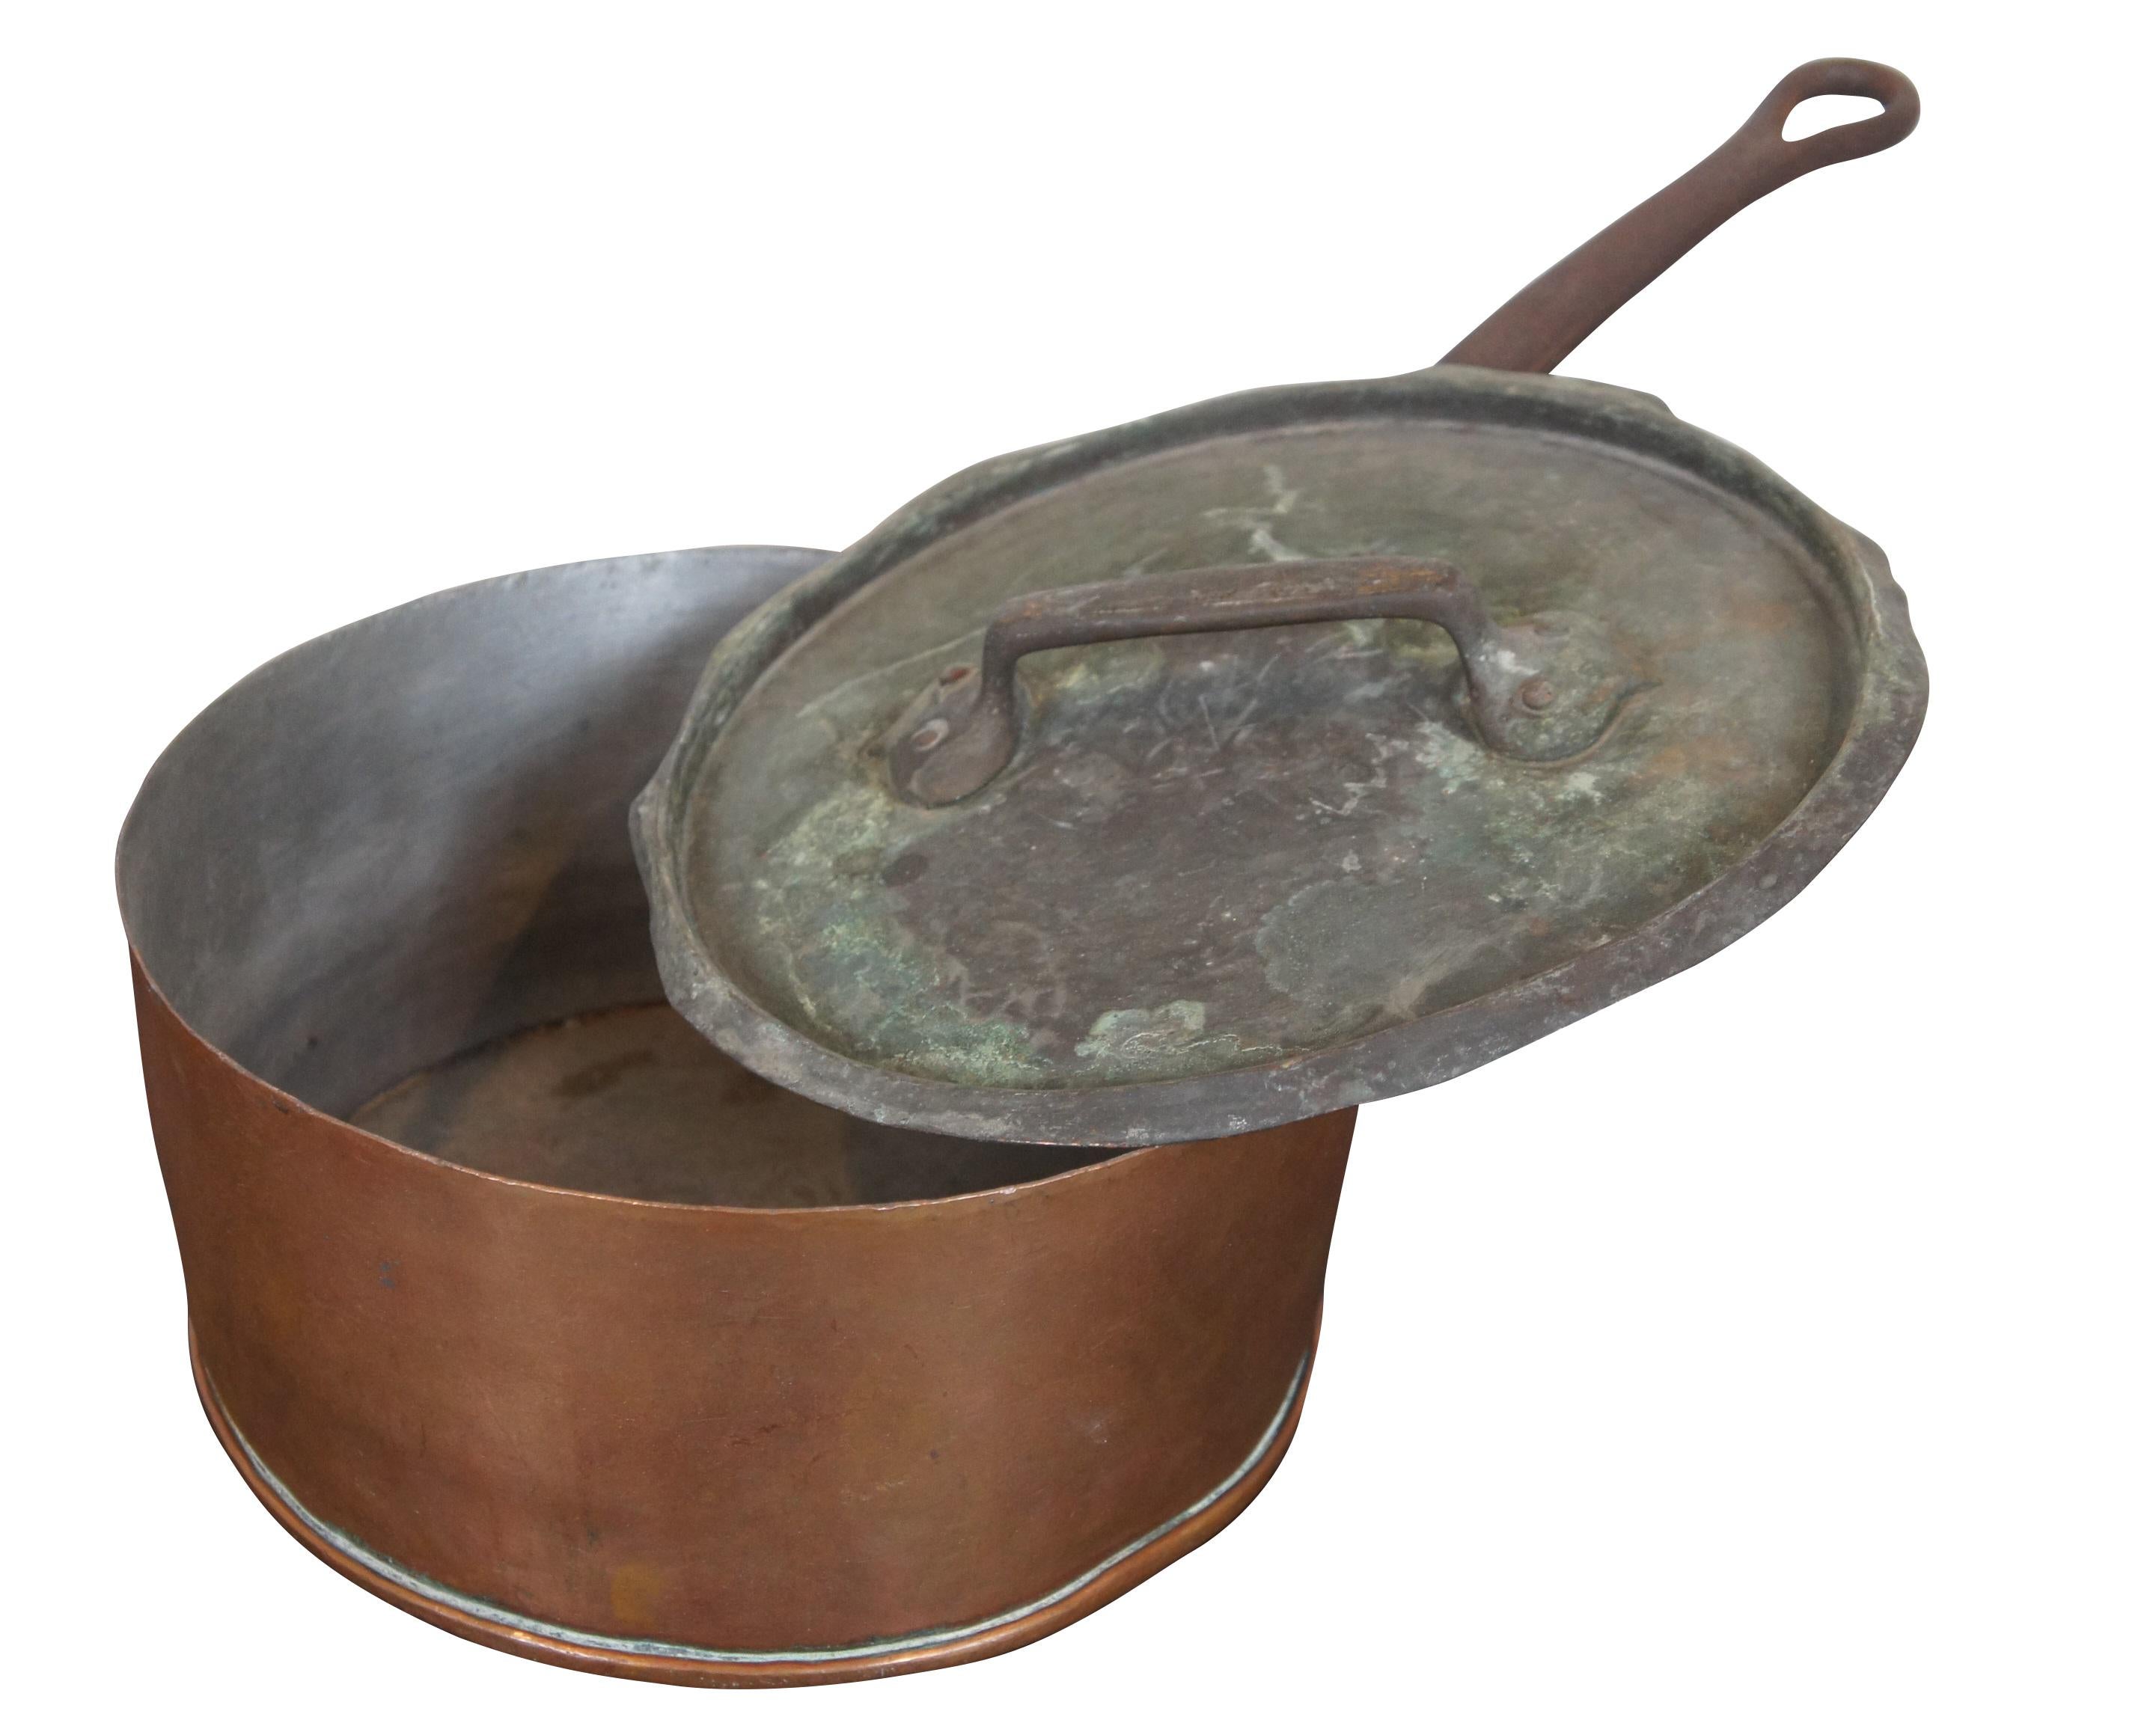 Antique French copper cook pot or saute pan featuring cast iron handle and lid. Measure: 21